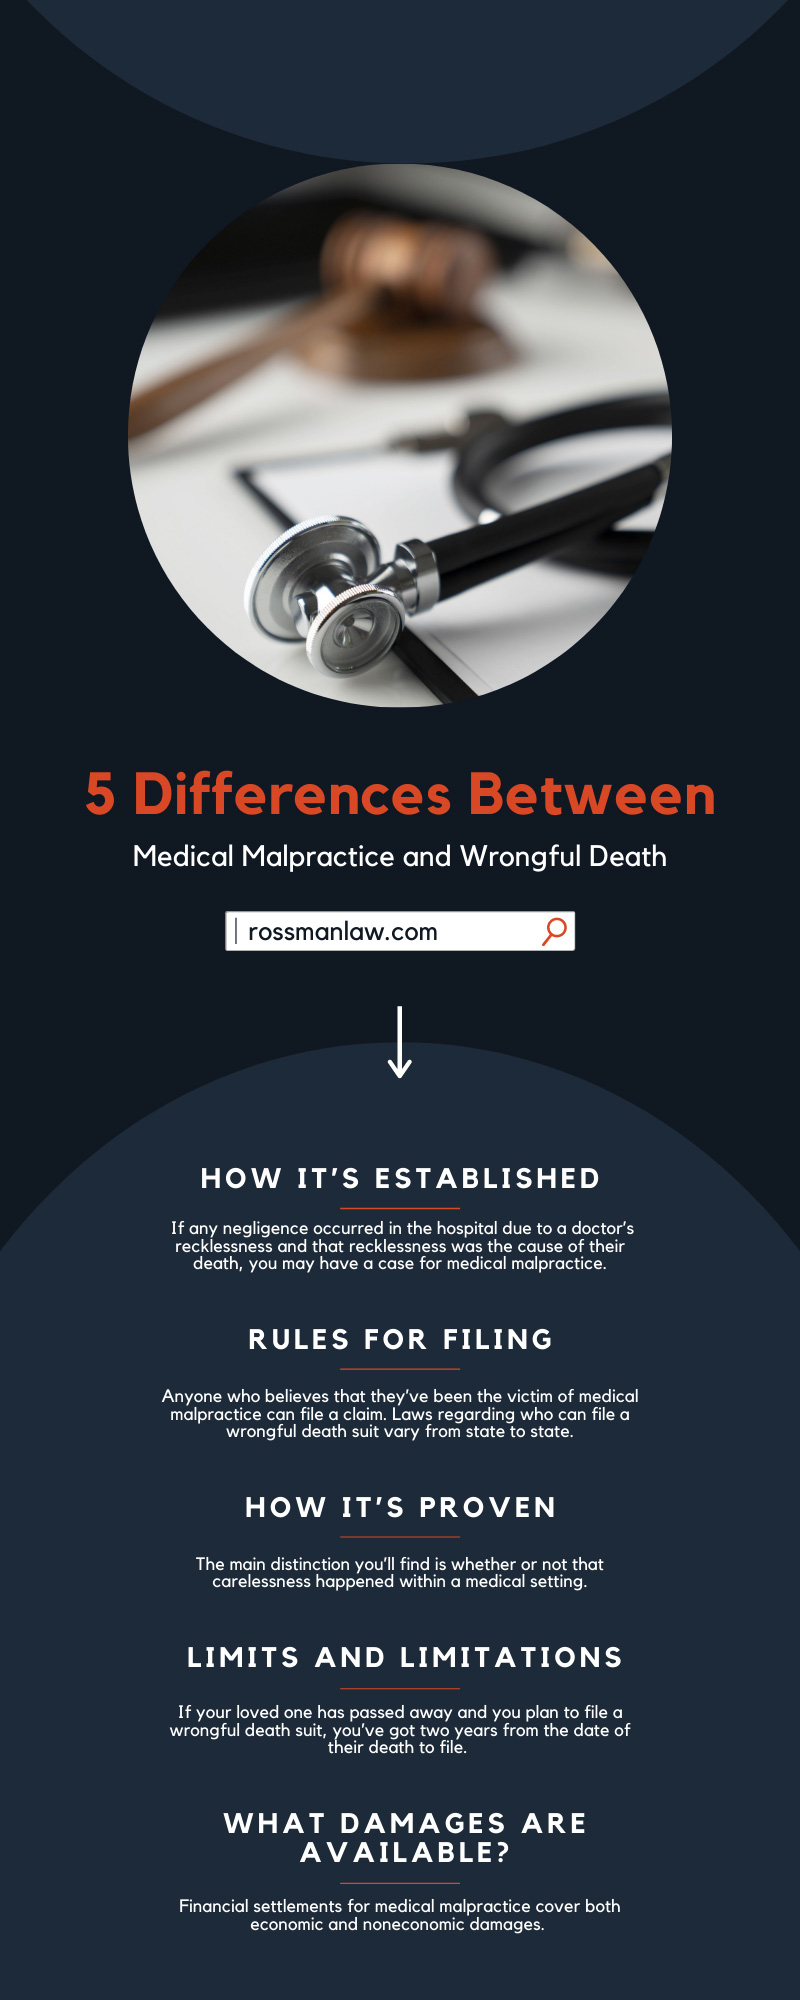 5 Differences Between Medical Malpractice and Wrongful Death